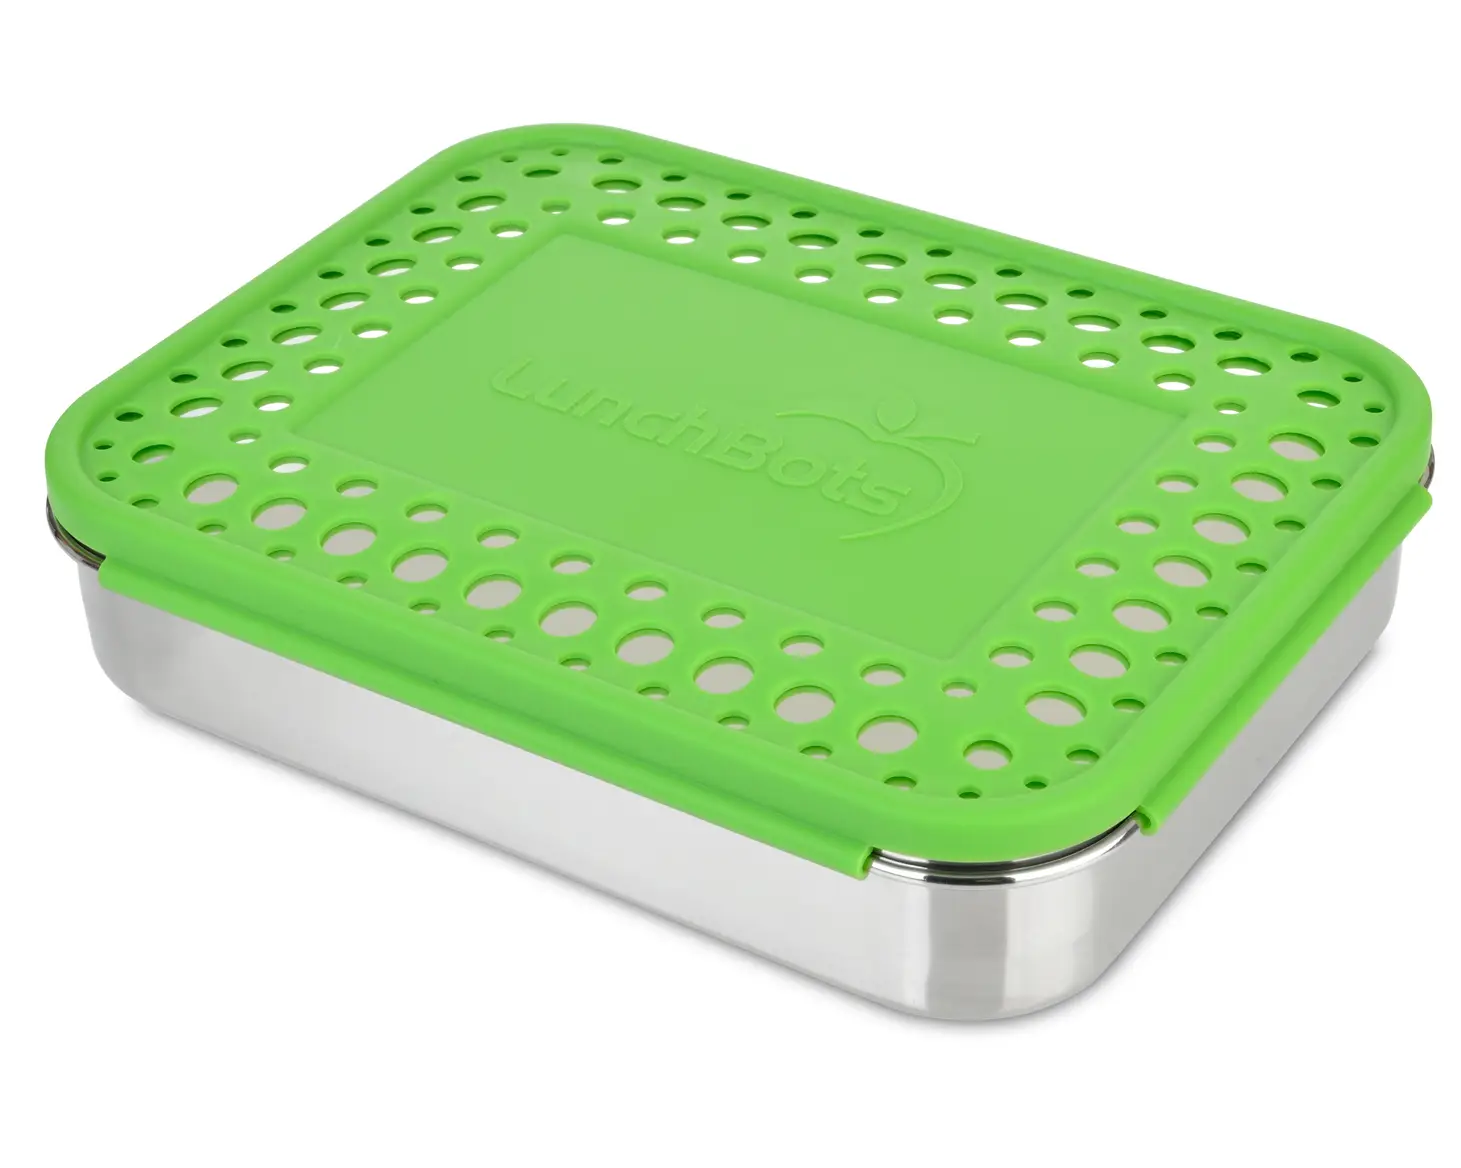 https://gimmethegoodstuff.org/wp-content/uploads/LunchBots-Large-Bento-Trio-Green-Dots-with-lid-on-and-latched.webp